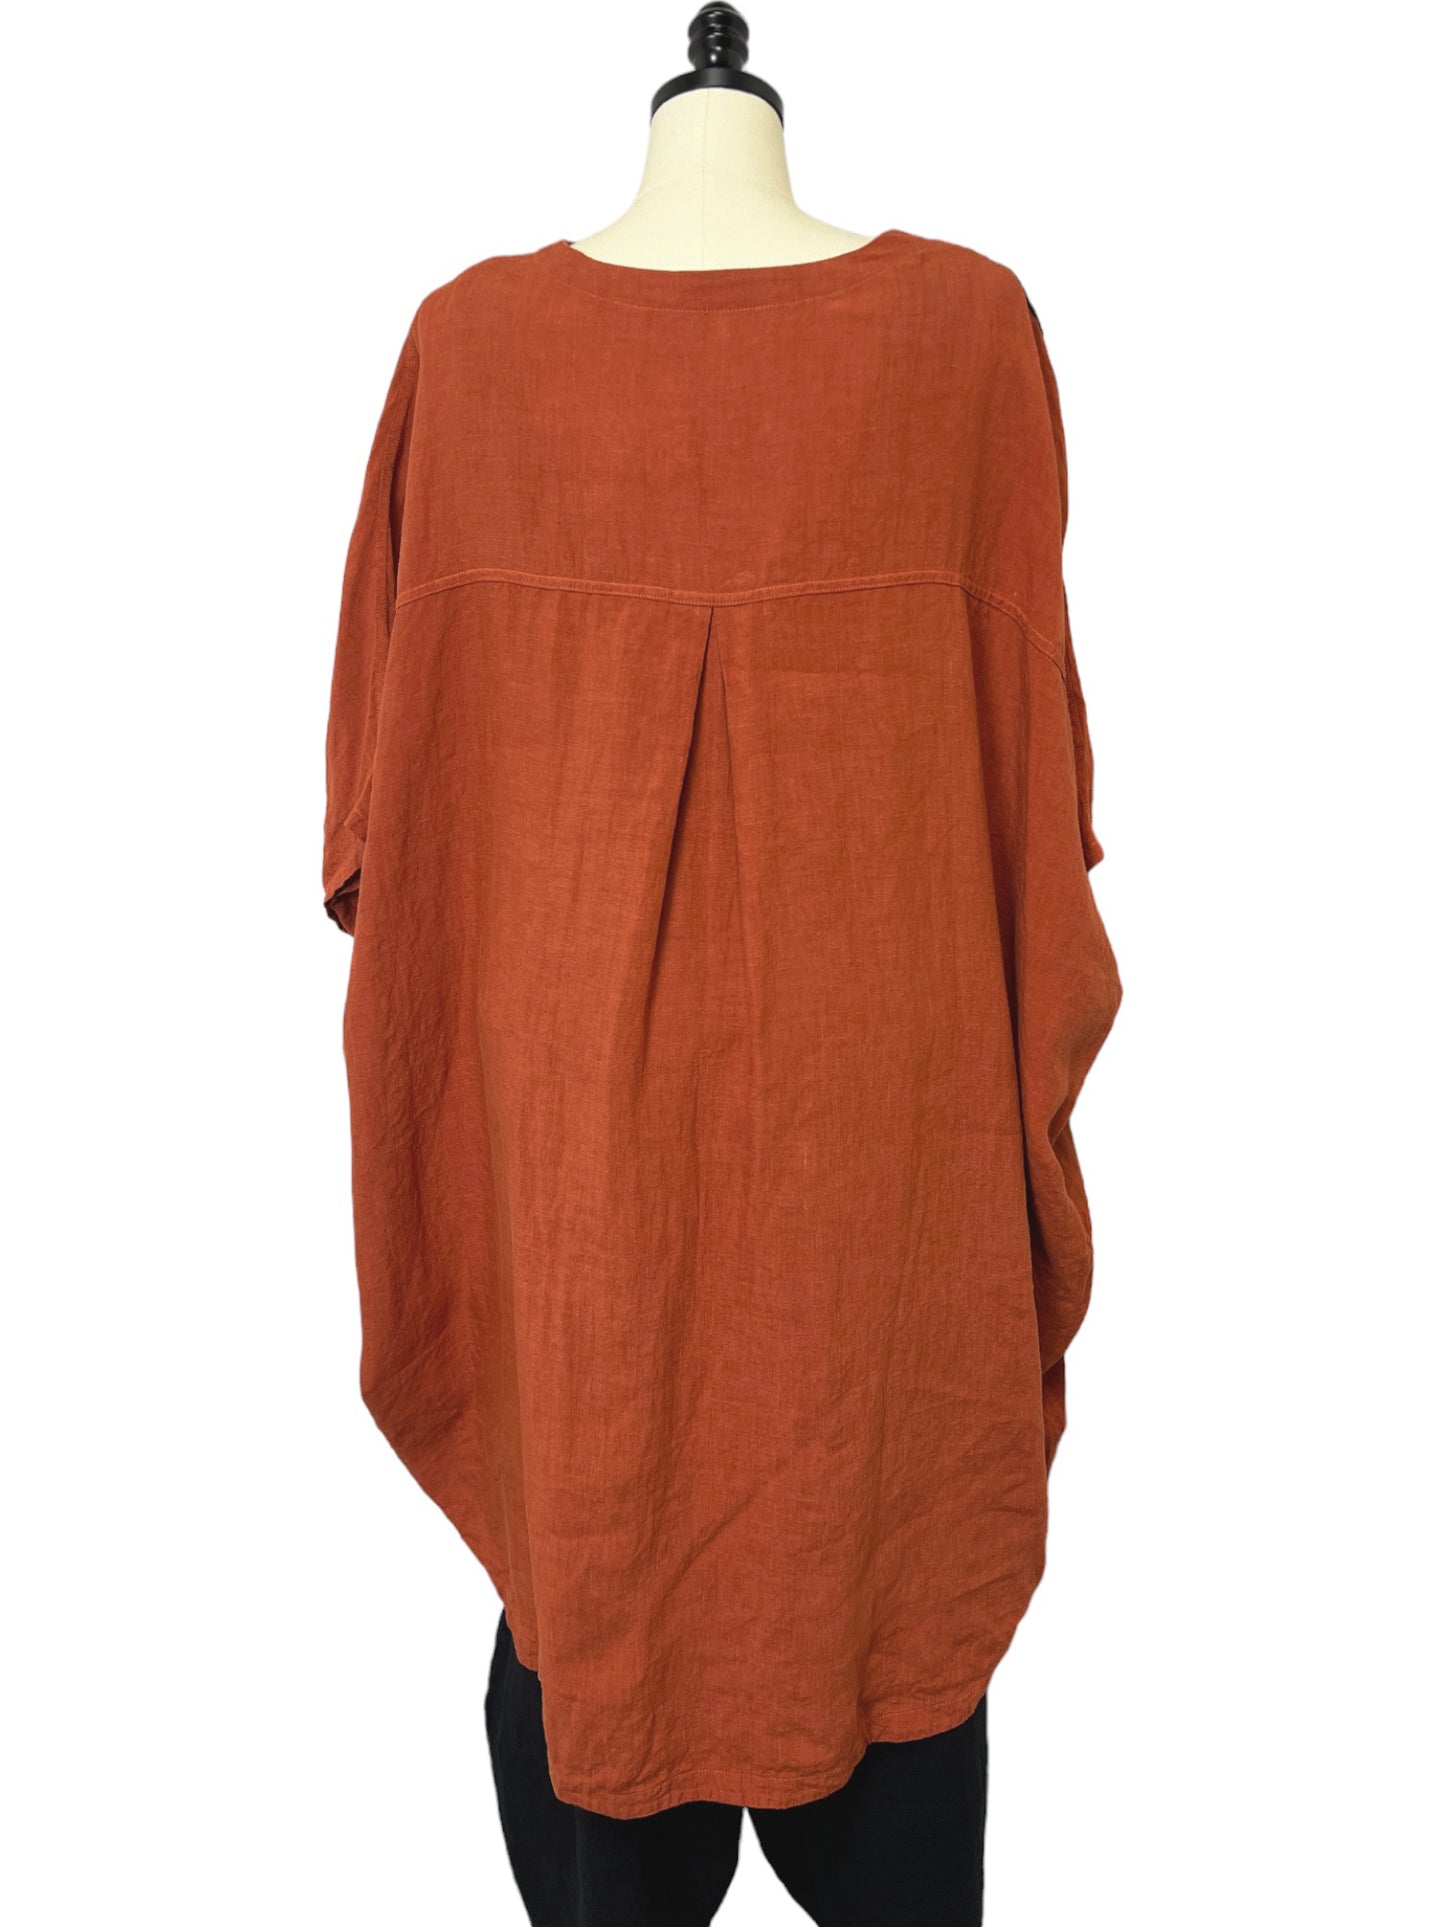 Cocoon Tunic in Brick